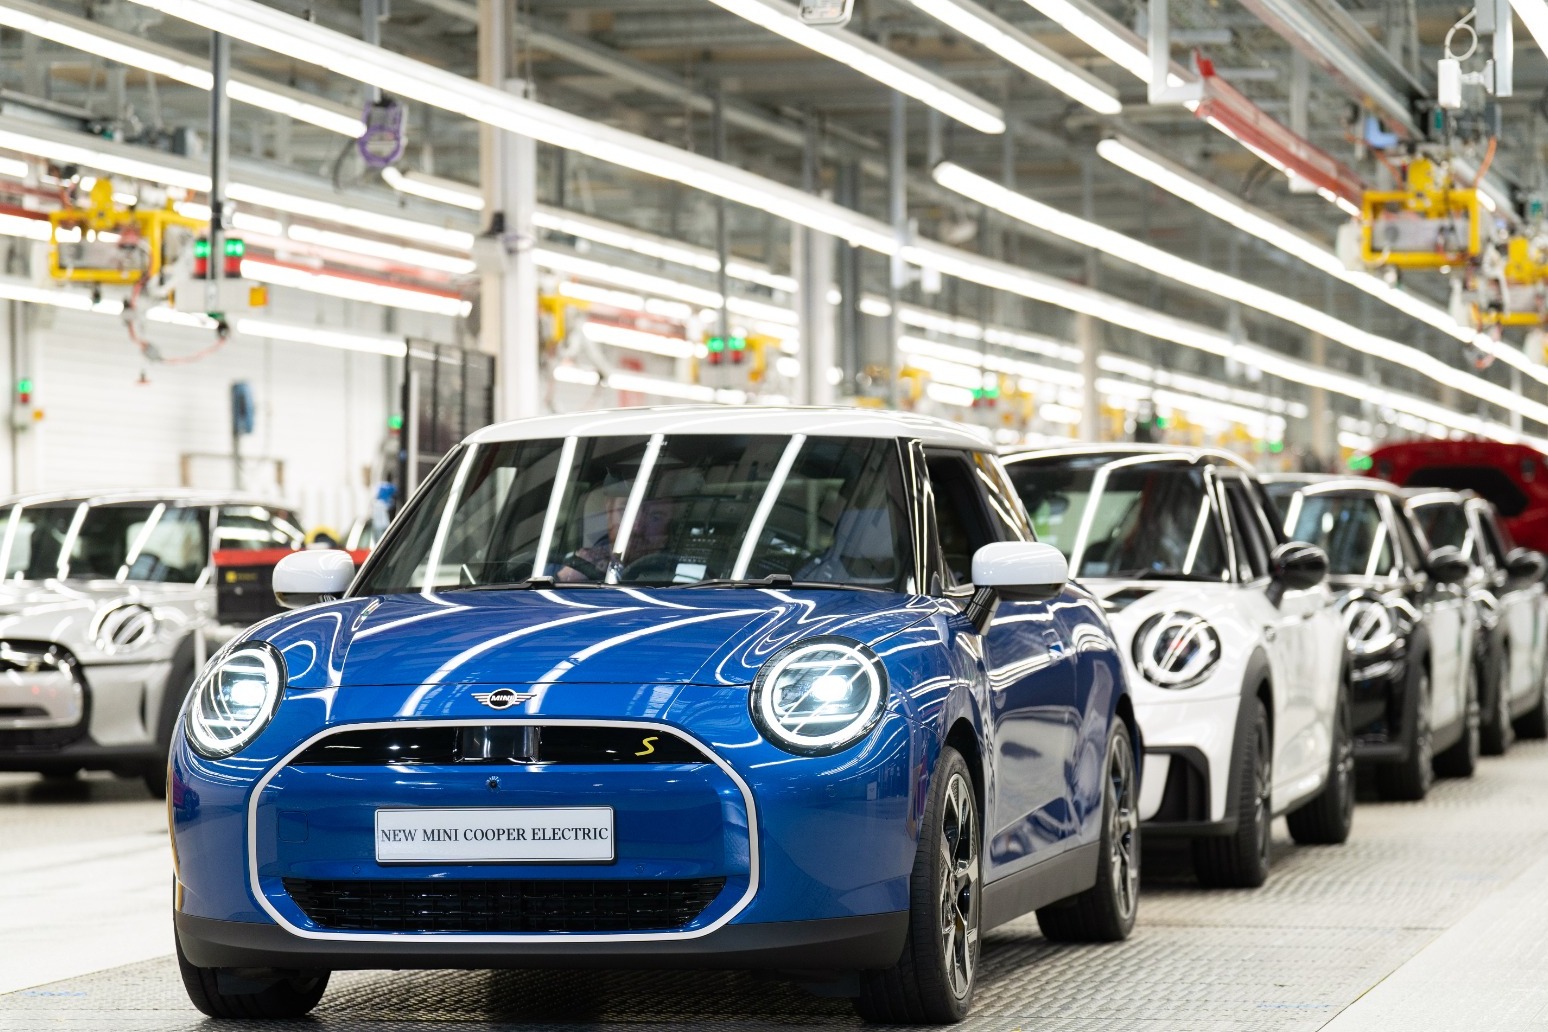 More than one million vehicles built in UK last year 